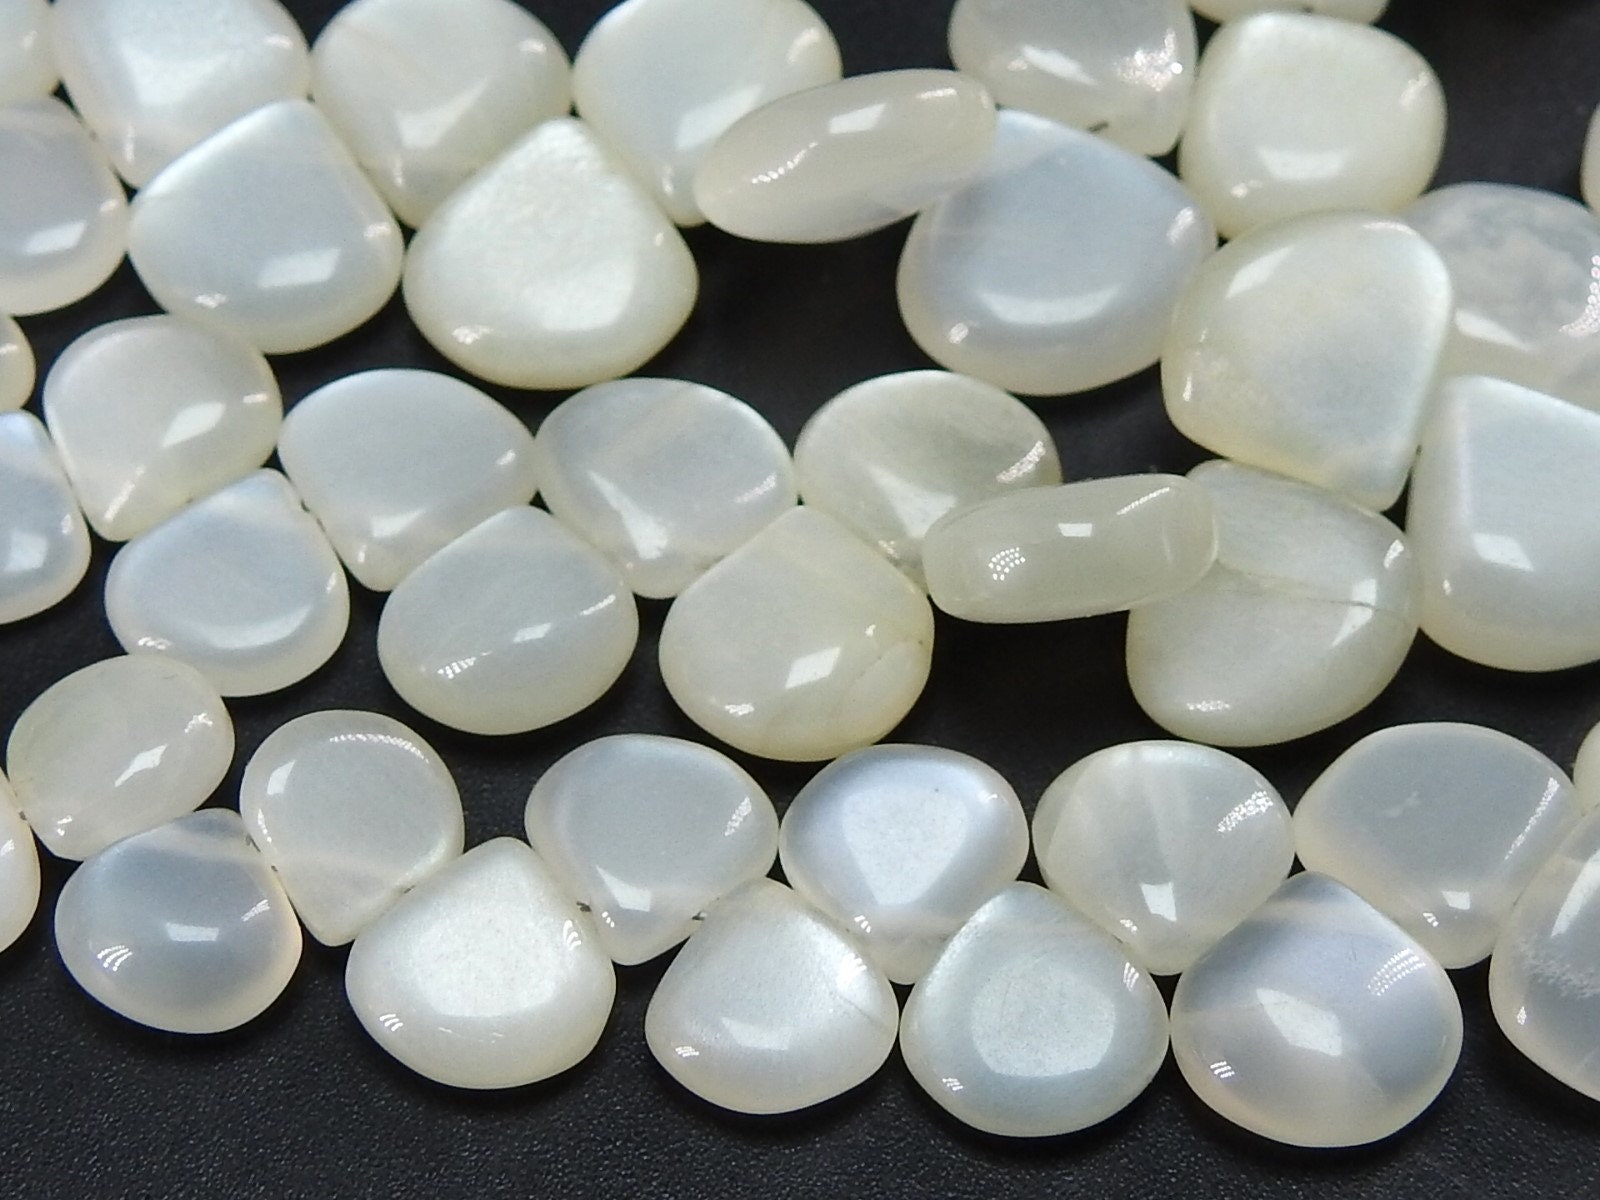 White Moonstone Smooth Heart,Teardrop,Drop,Loose Stone,Handmade Bead,For Making Jewelry,Wholesaler,Supplies 8Inch 6X12MM Approx (pme)BR2 | Save 33% - Rajasthan Living 20